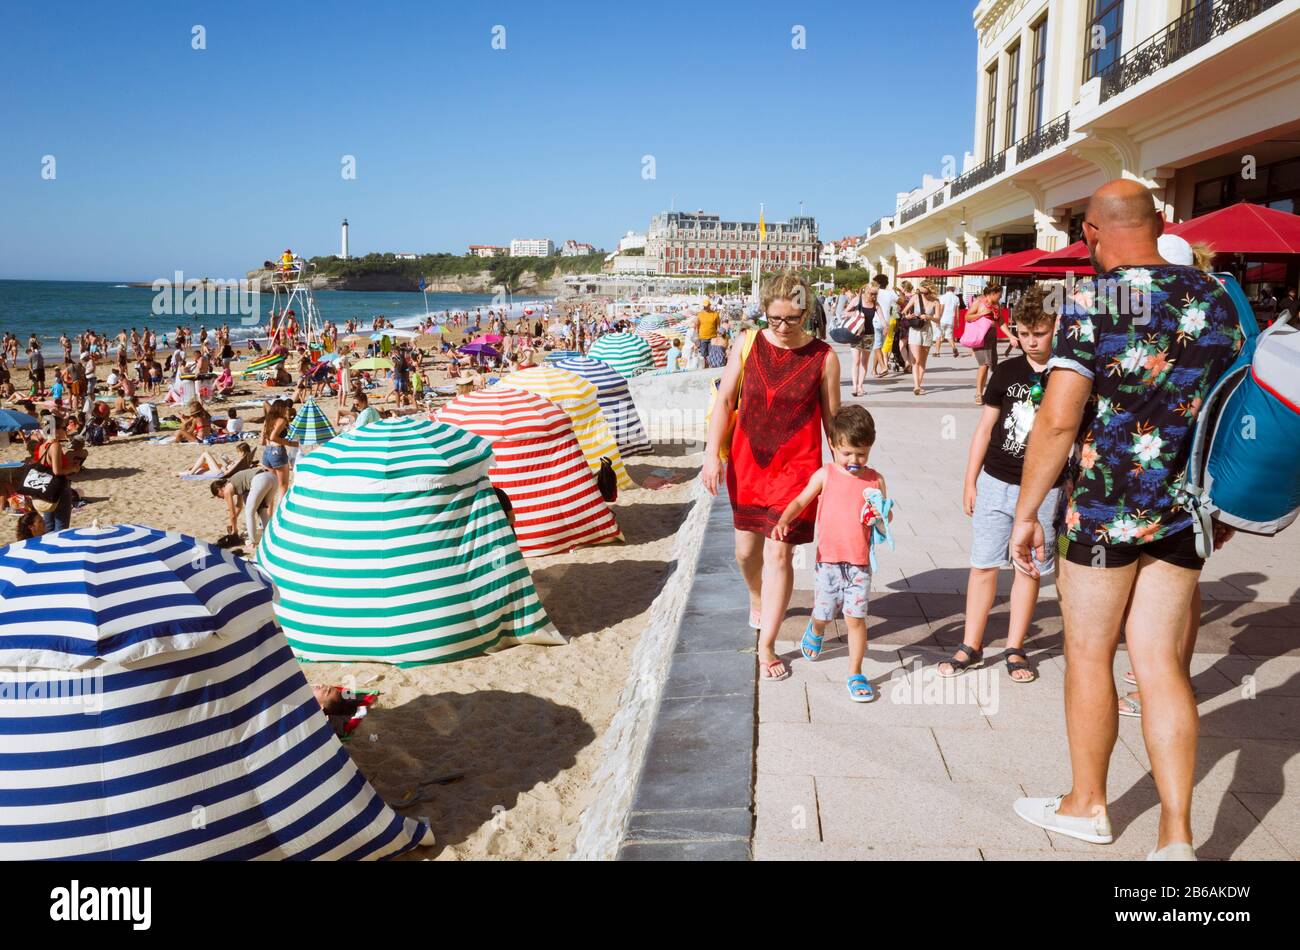 Biarritz, French Basque Country, France - July 19th, 2019 : Street scene with beach goers among colorful sunshades at La Grande Plage, the town's larg Stock Photo